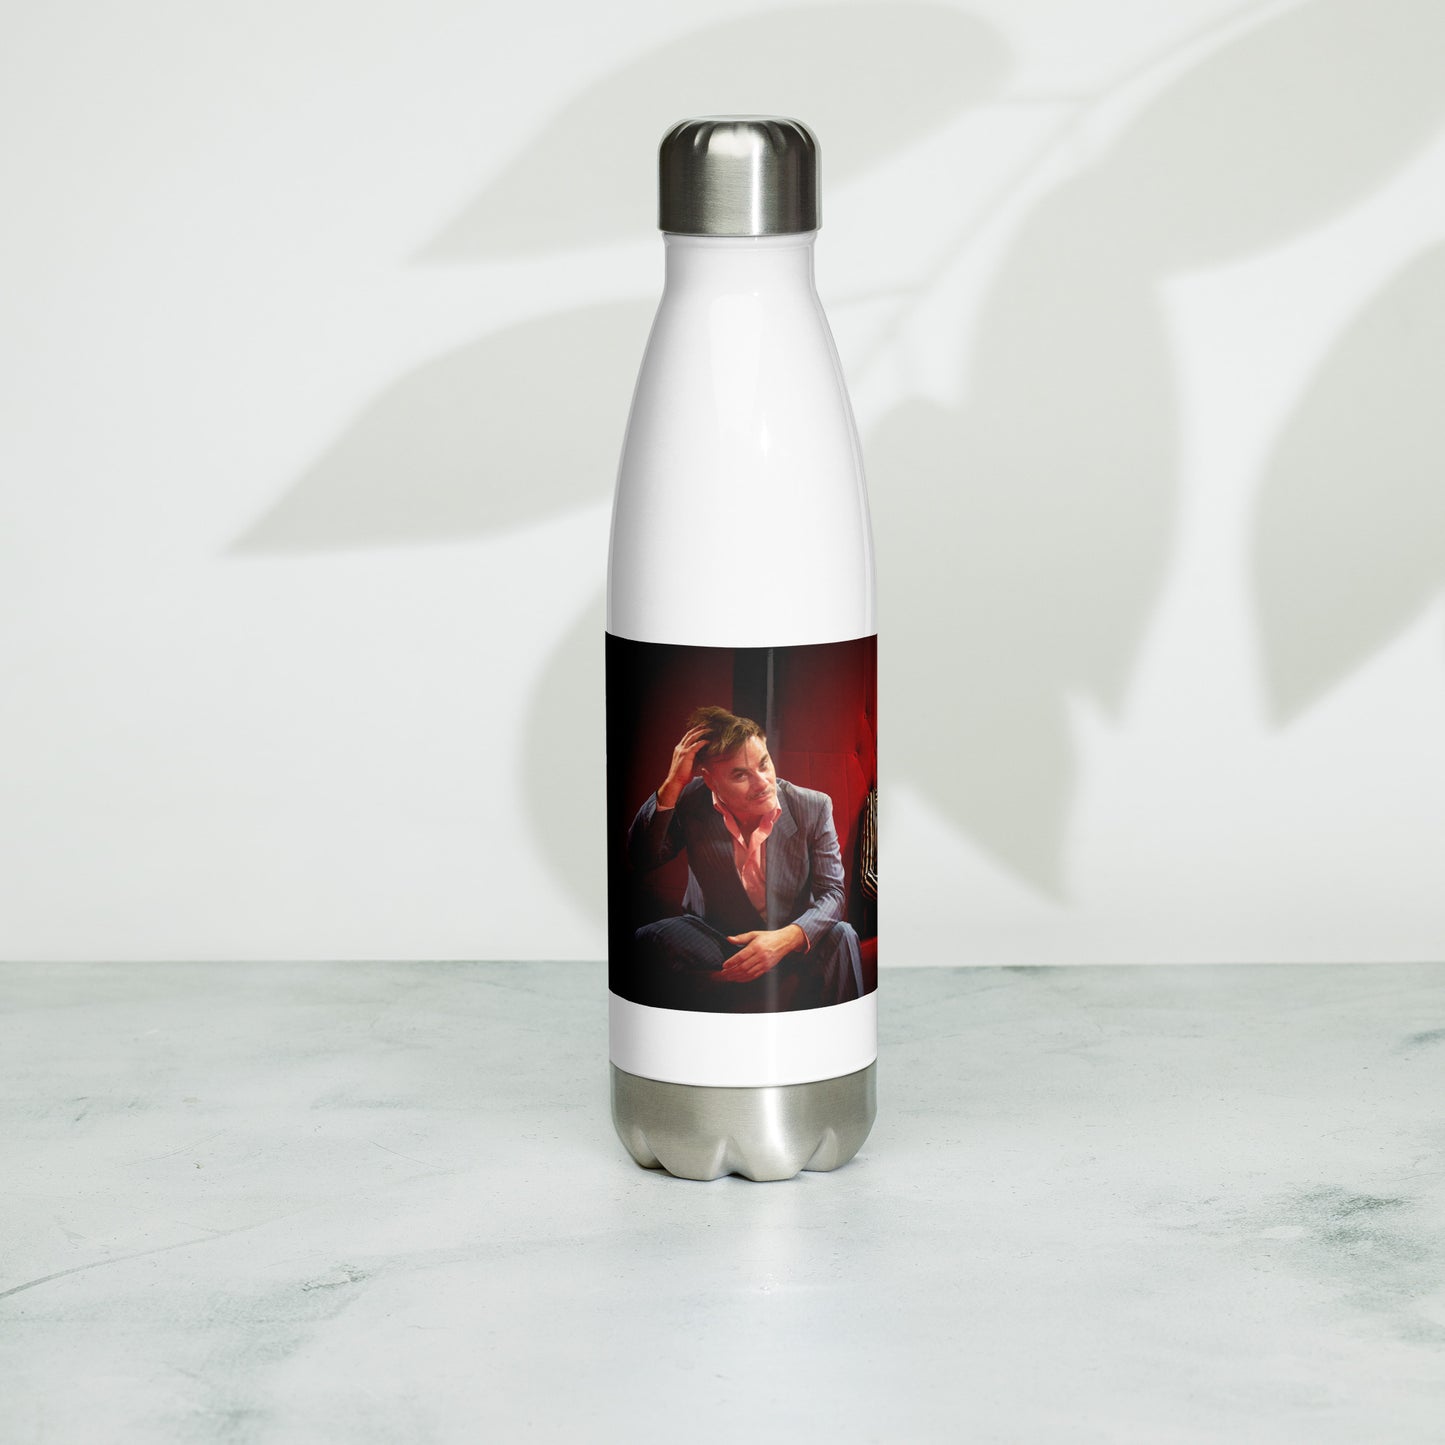 Strange Tales, official band photo and logo, Stainless Steel Water Bottle